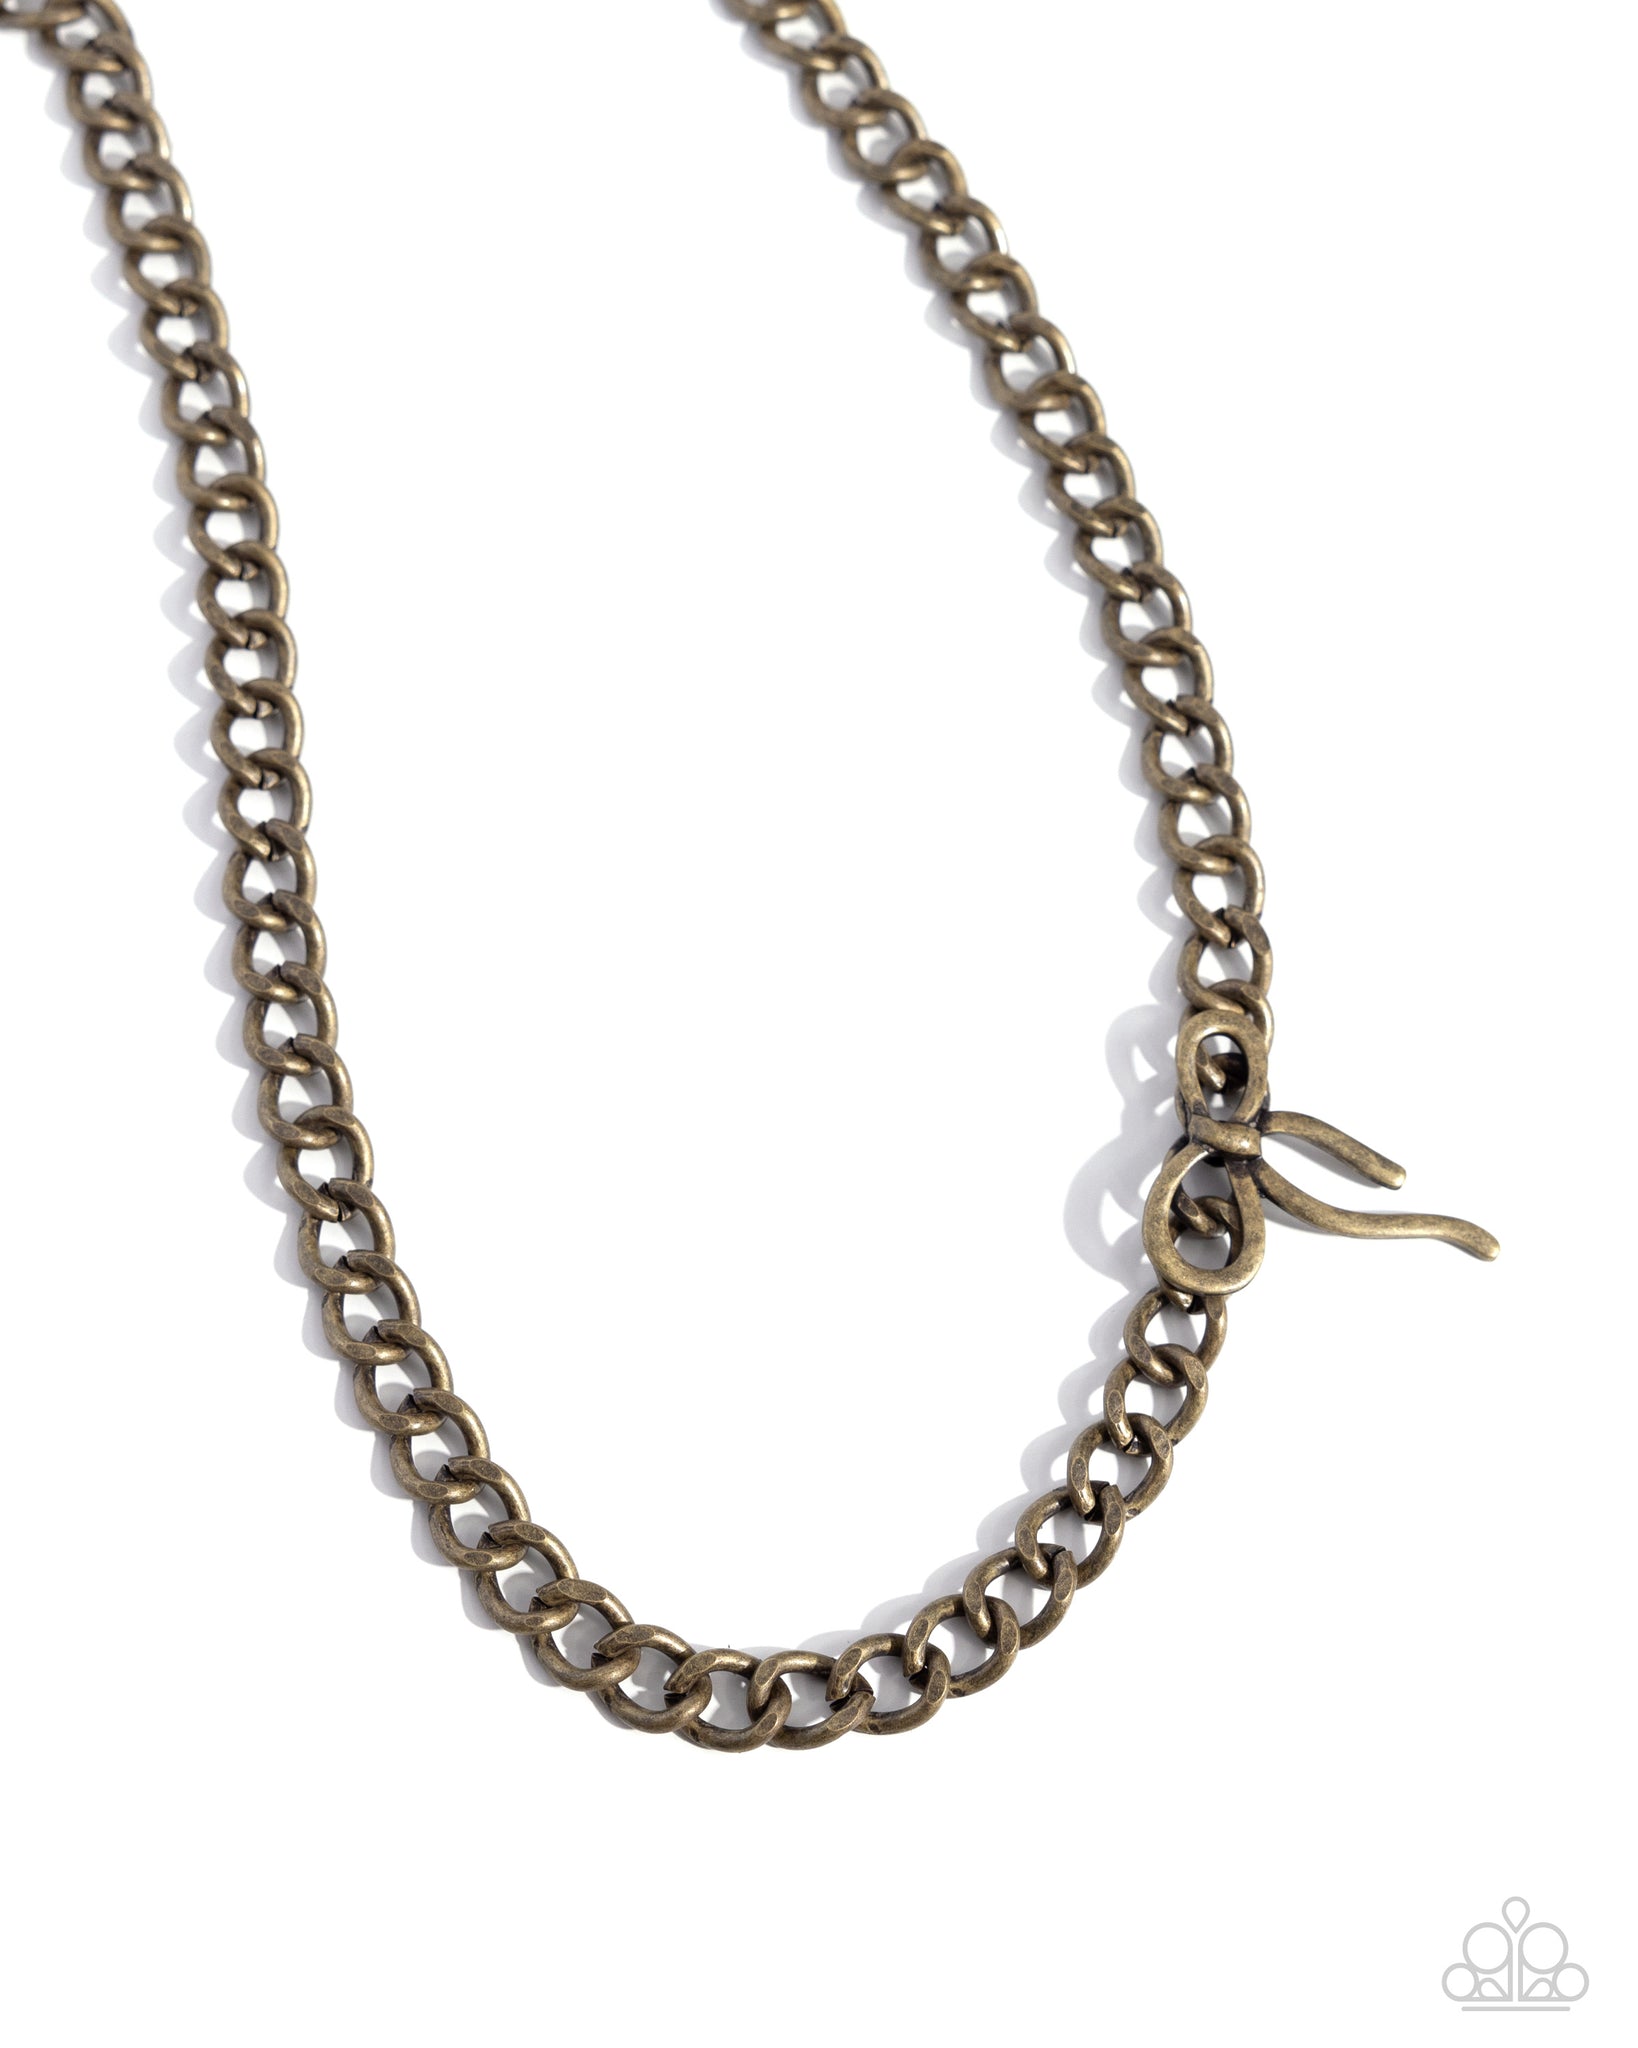 Leading Loops Necklace (Silver, Brass)